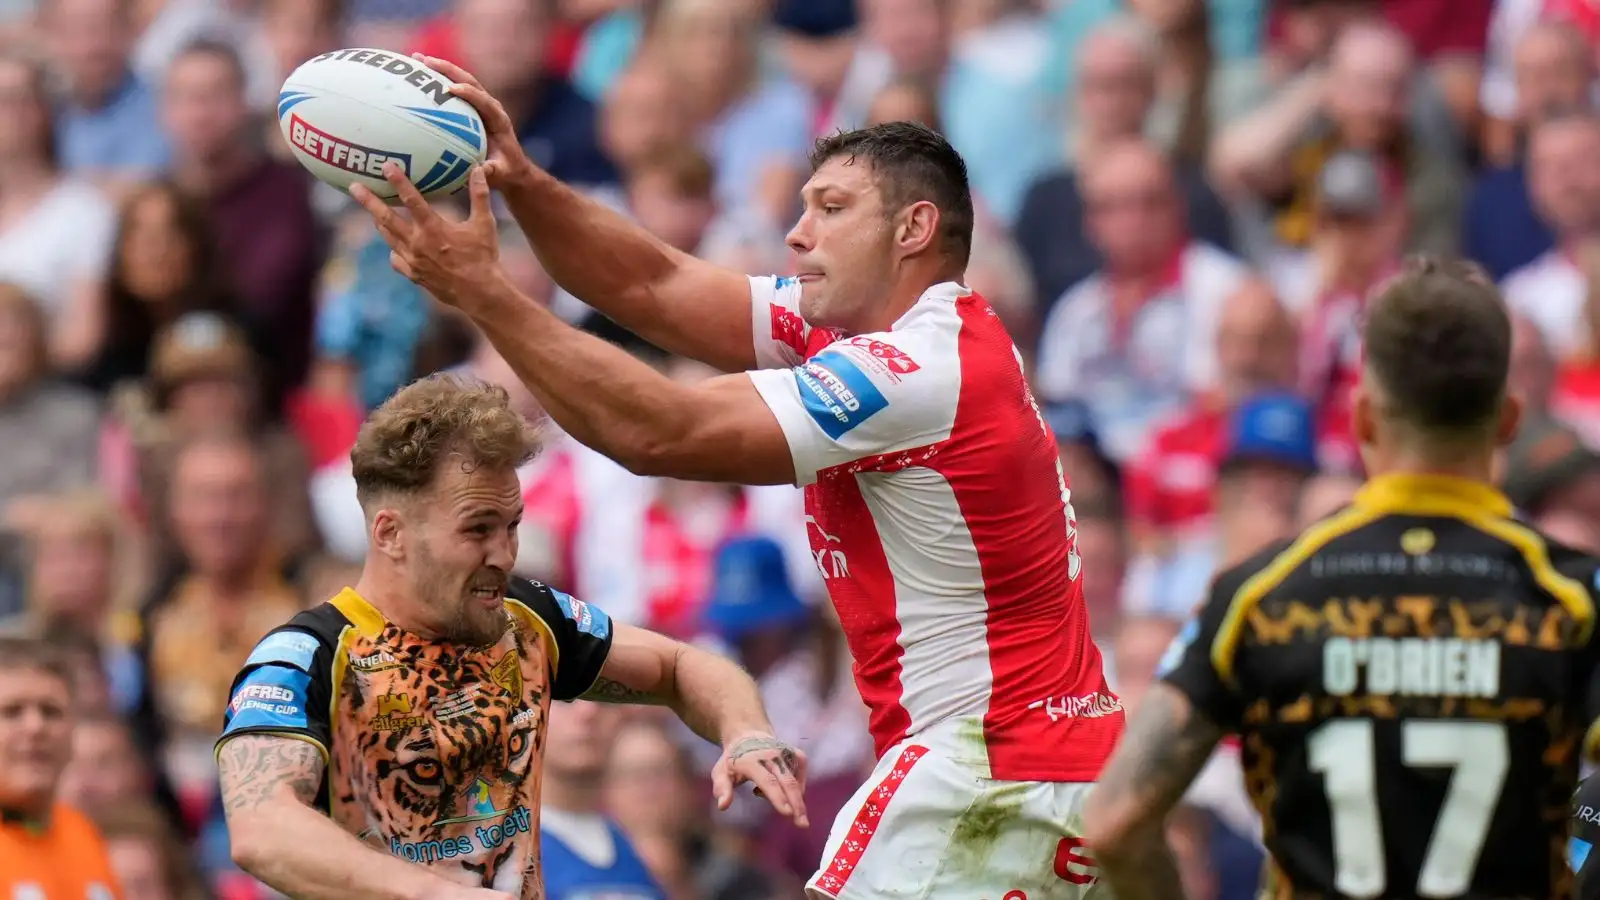 ‘You’ve got to lose one to win one’ – Hull KR on ‘upward trajectory’ as Ryan Hall discusses Wembley heartache